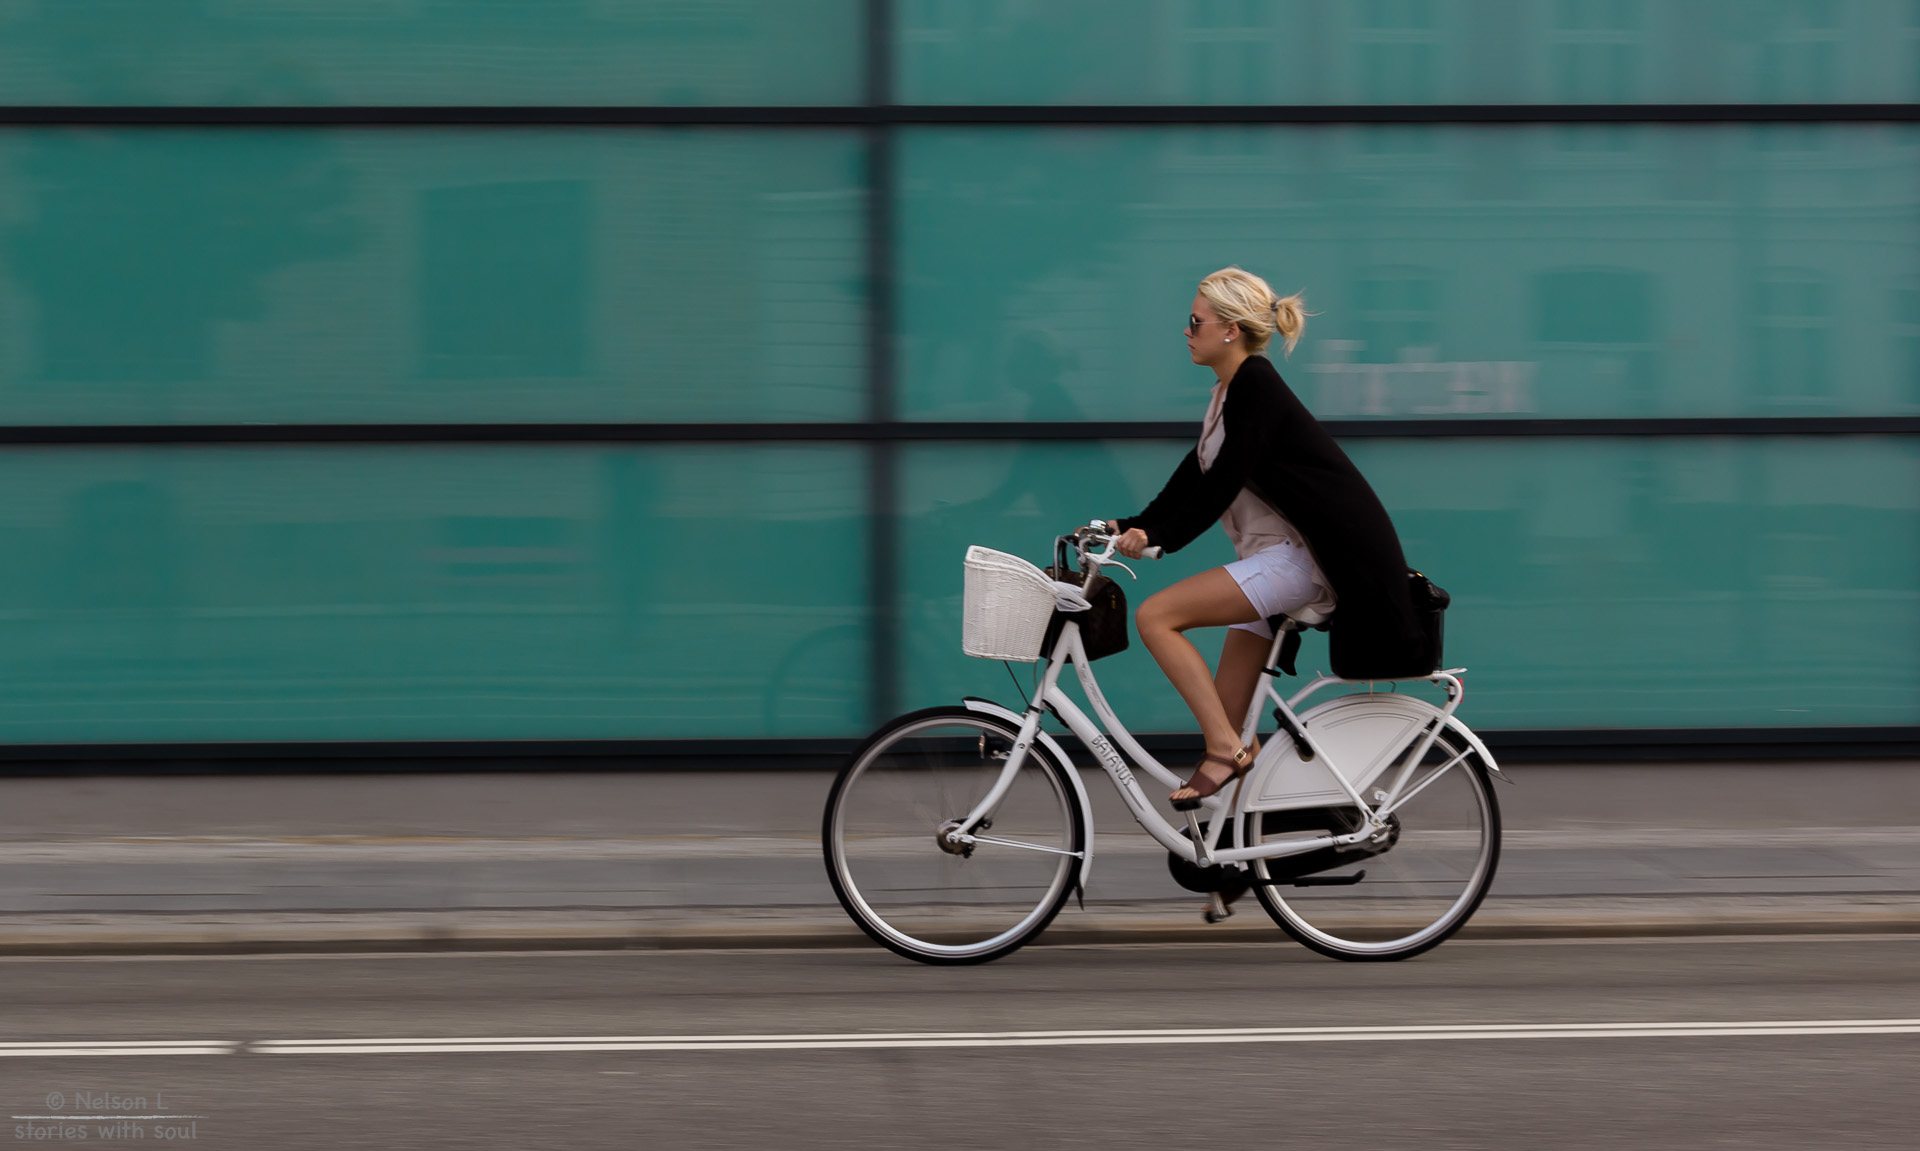 blond woman biking on white bicycle past big glass windows in city